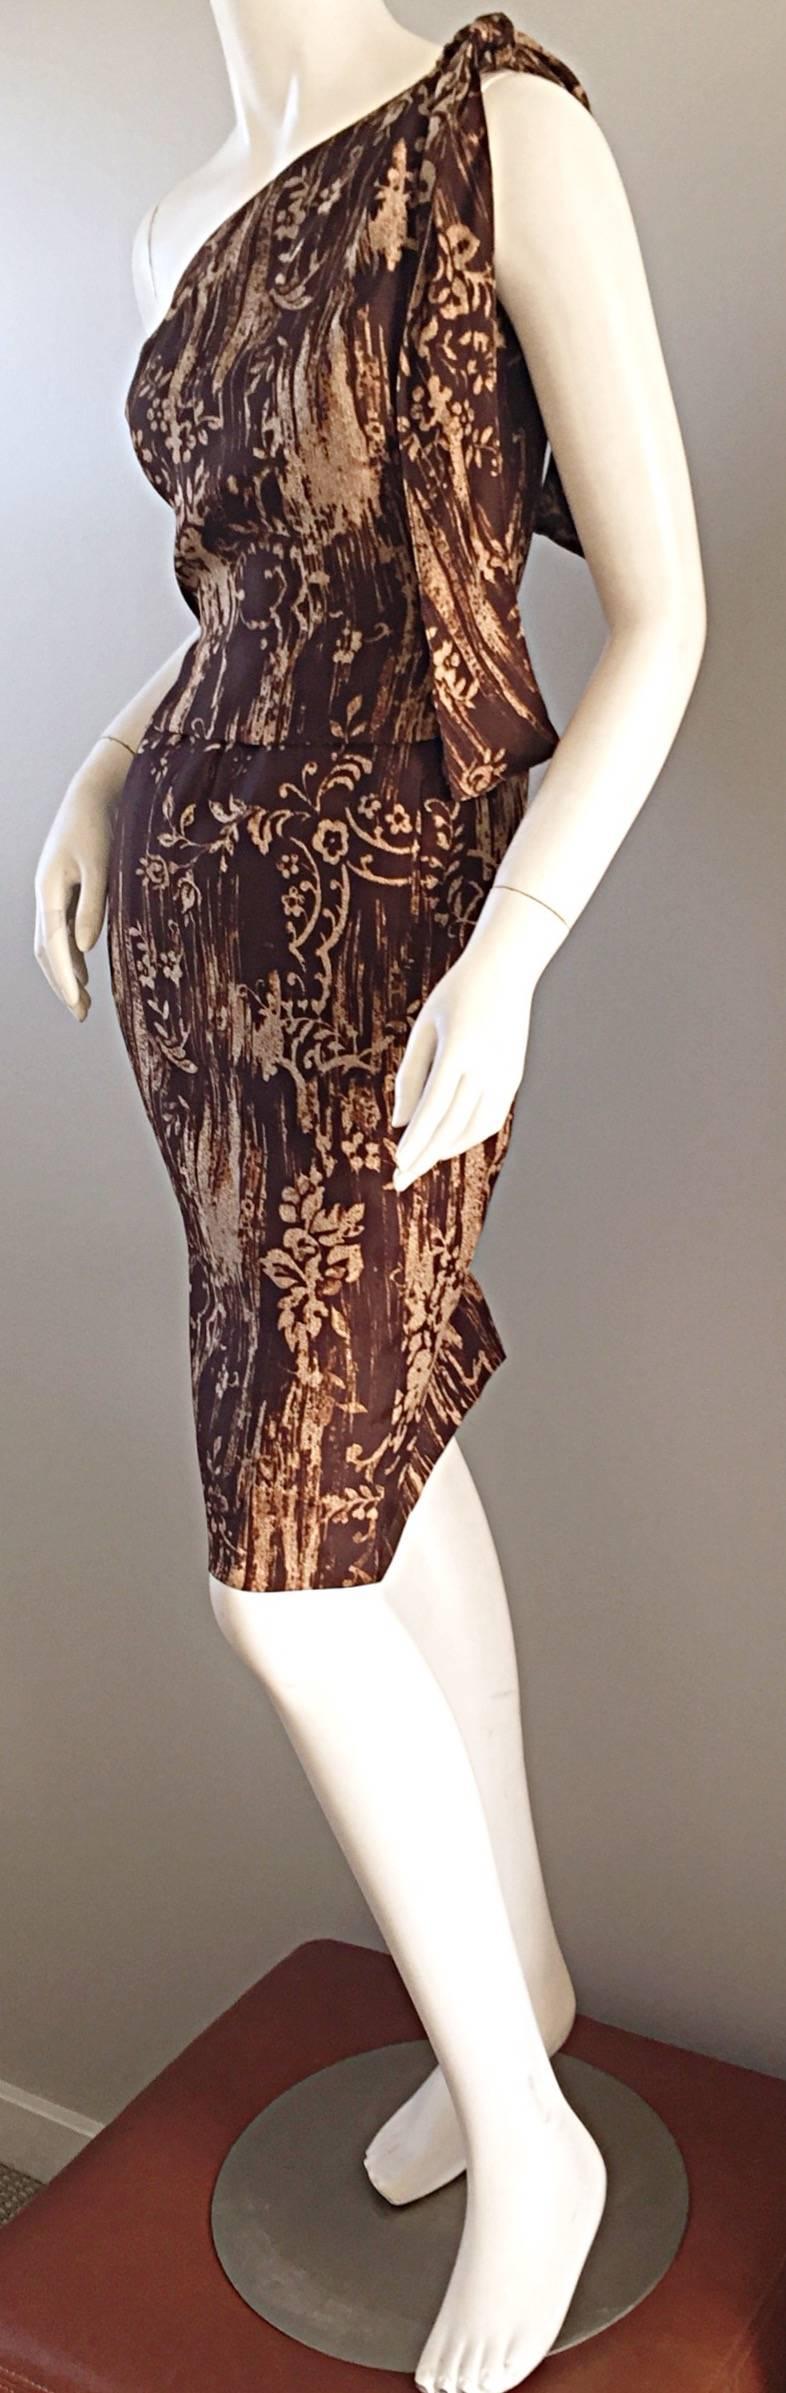 Amazing brand new with tags Oscar de la Renta silk one shoulder dress! Detailed for $3,200! Featured in the Resort 2009 Oscar Runway Collection (see pictures). One shoulder can be worn lose, or in a bow. Stunning piece of art! Brand new with tags.